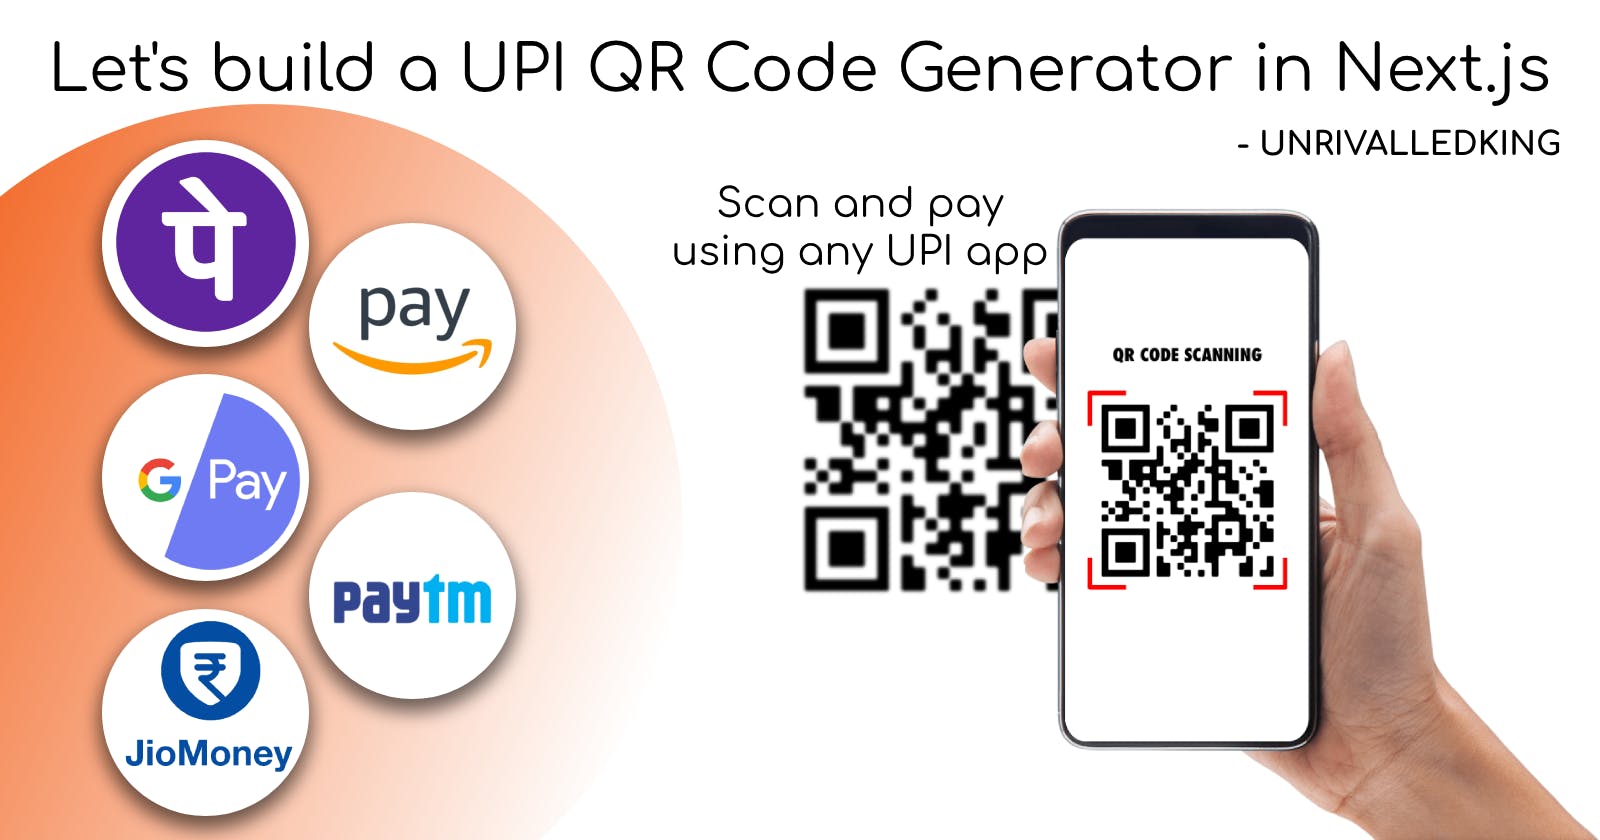 How to Build a UPI QR Code Generator with Next.js